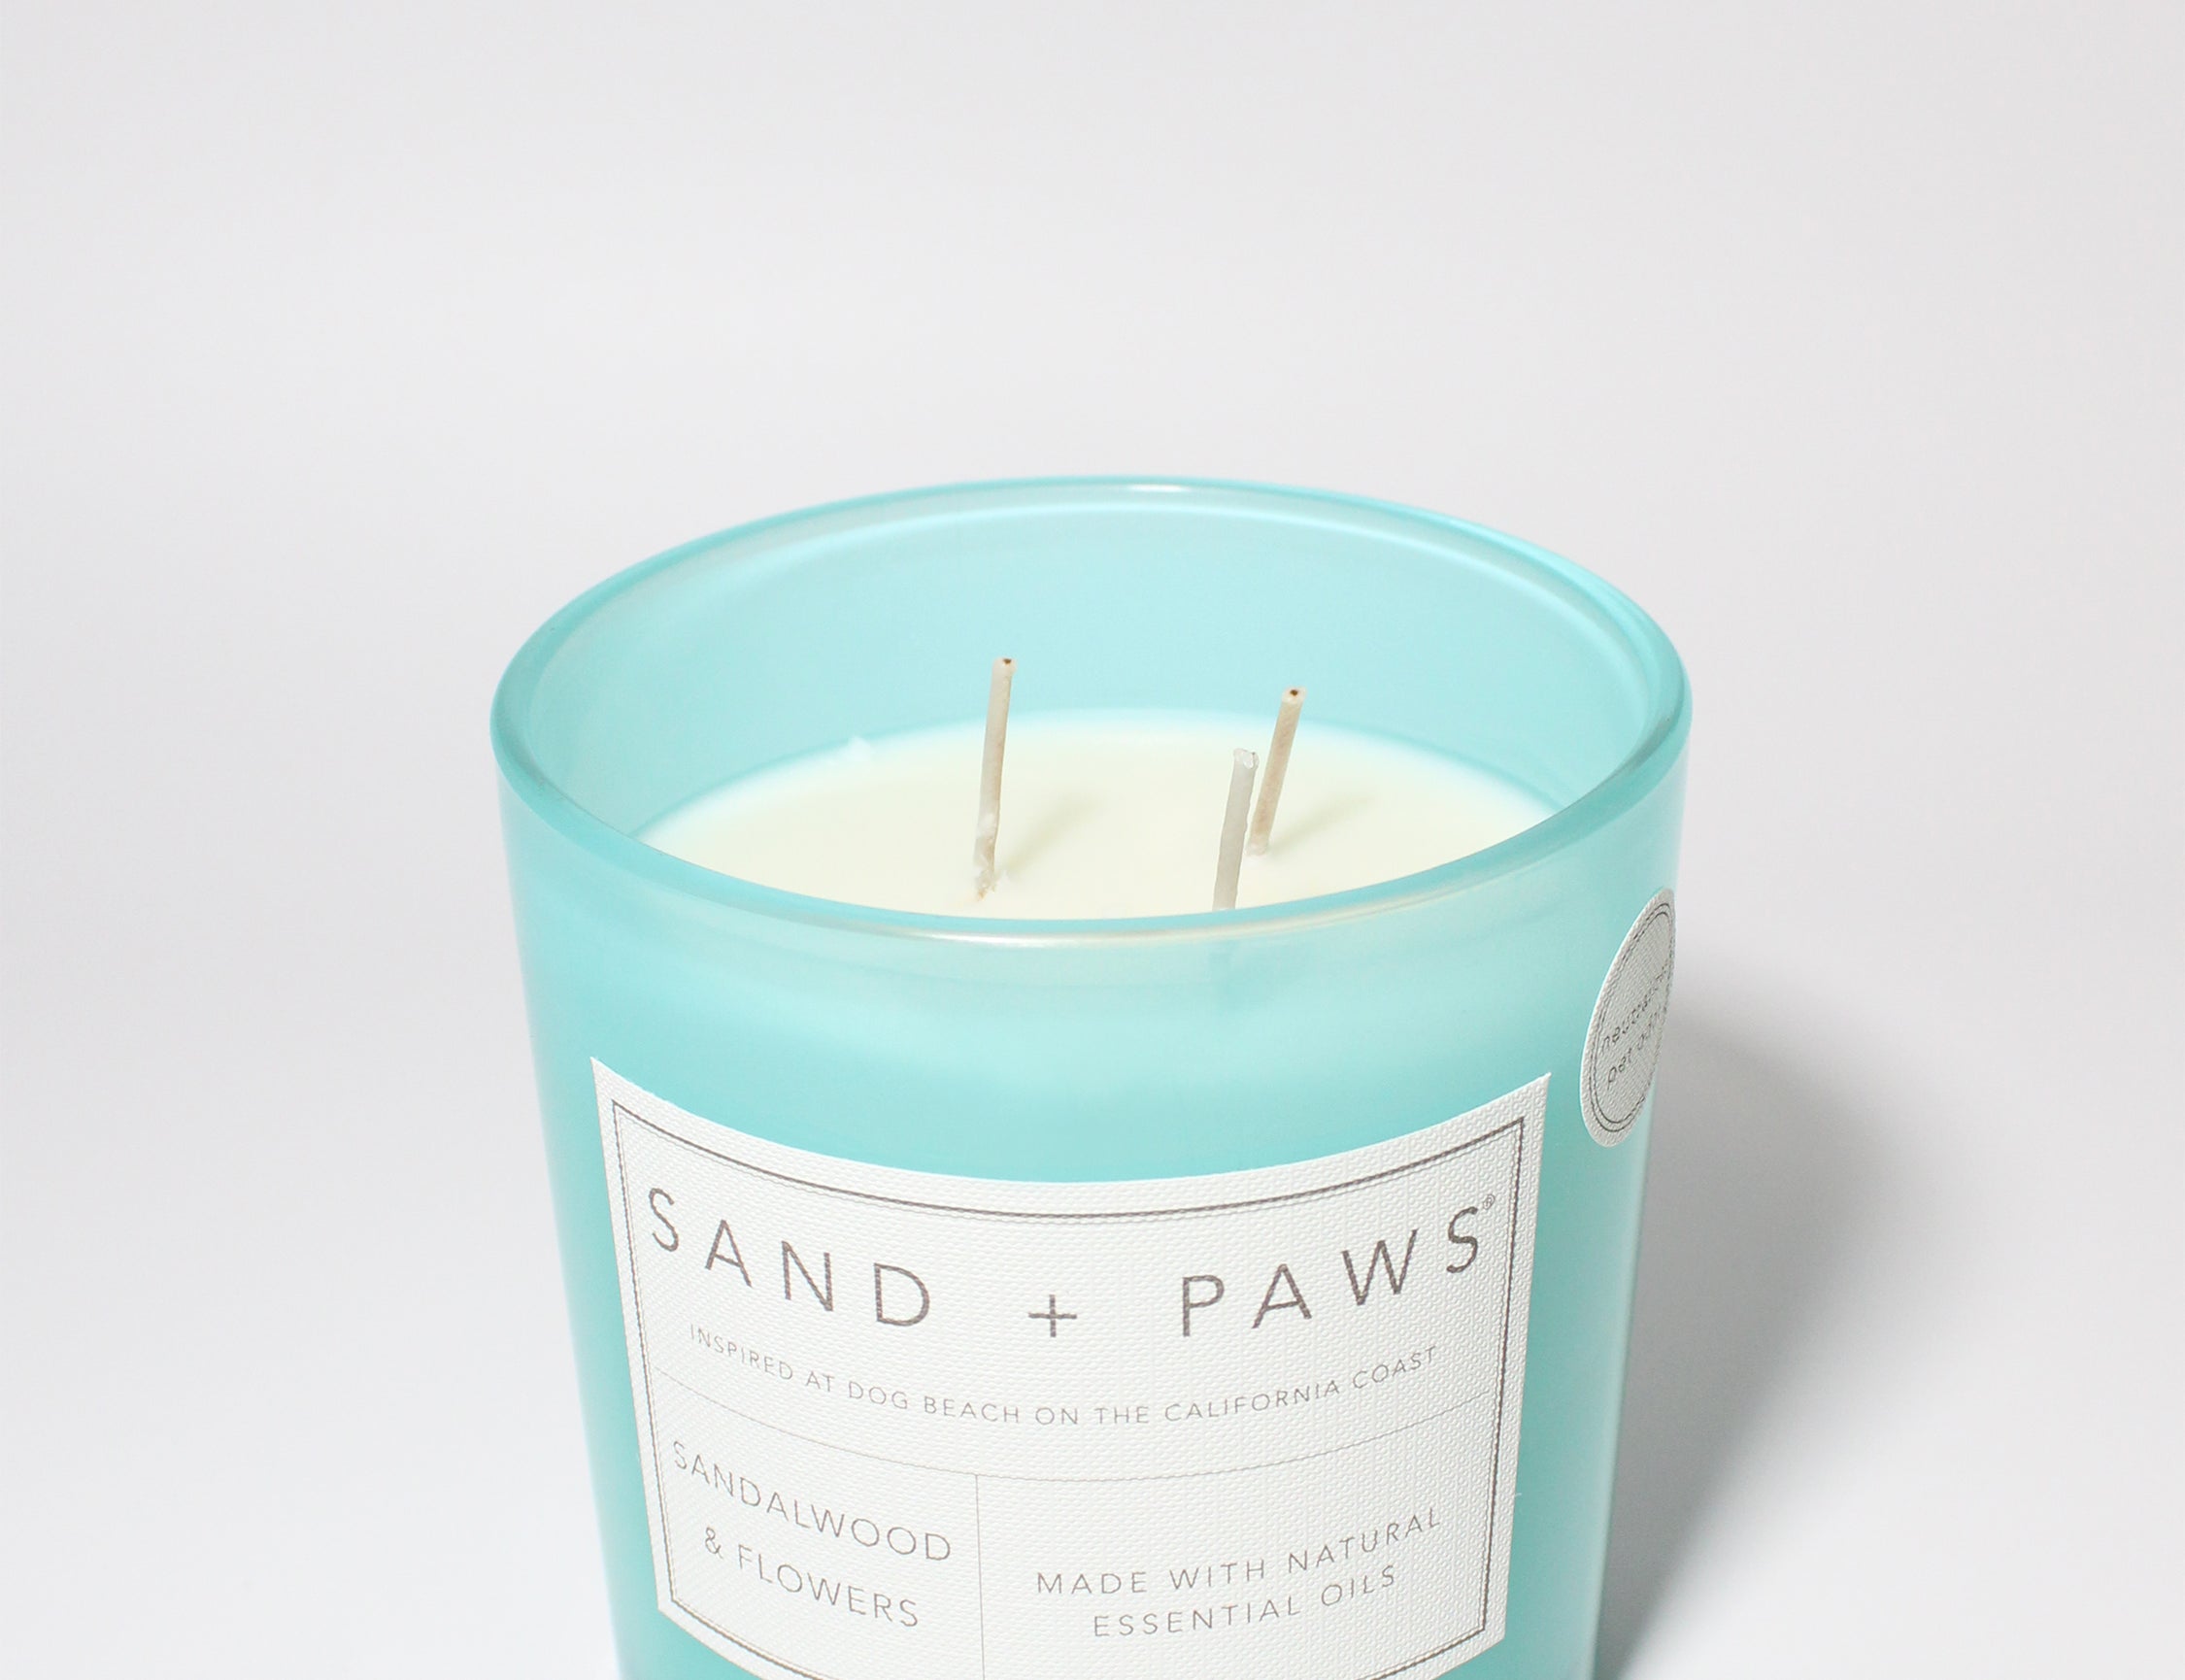 Sand + Paws Sandalwood & Flowers 21 oz scented candle Coast vessel with You had me at Woof carved lid